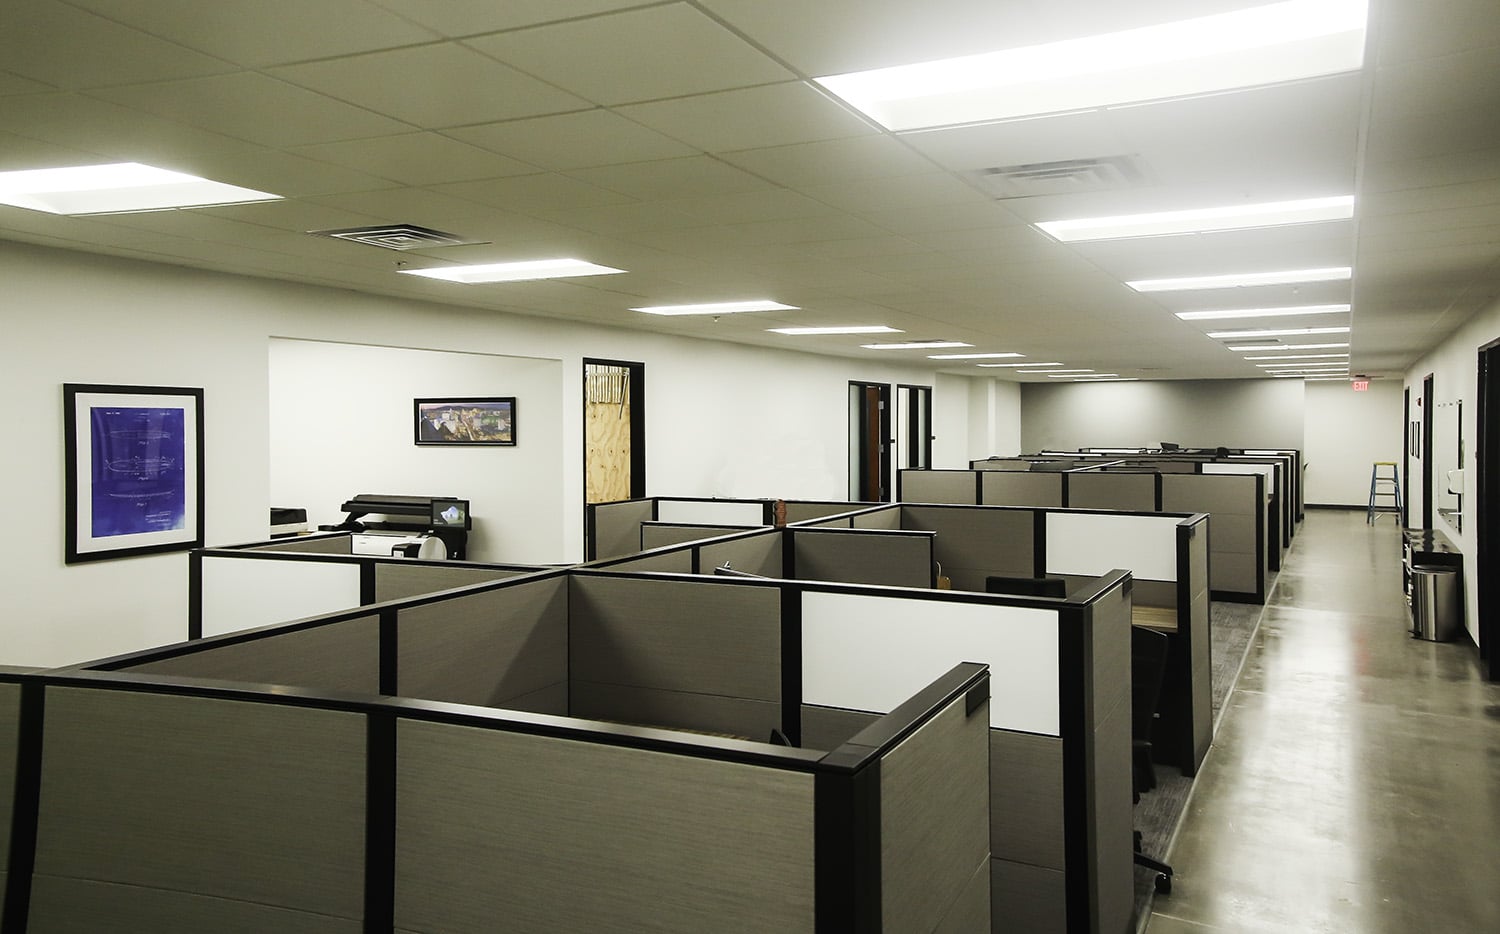 Kalb Industries completed an office tenant improvement for Wood Rodgers.